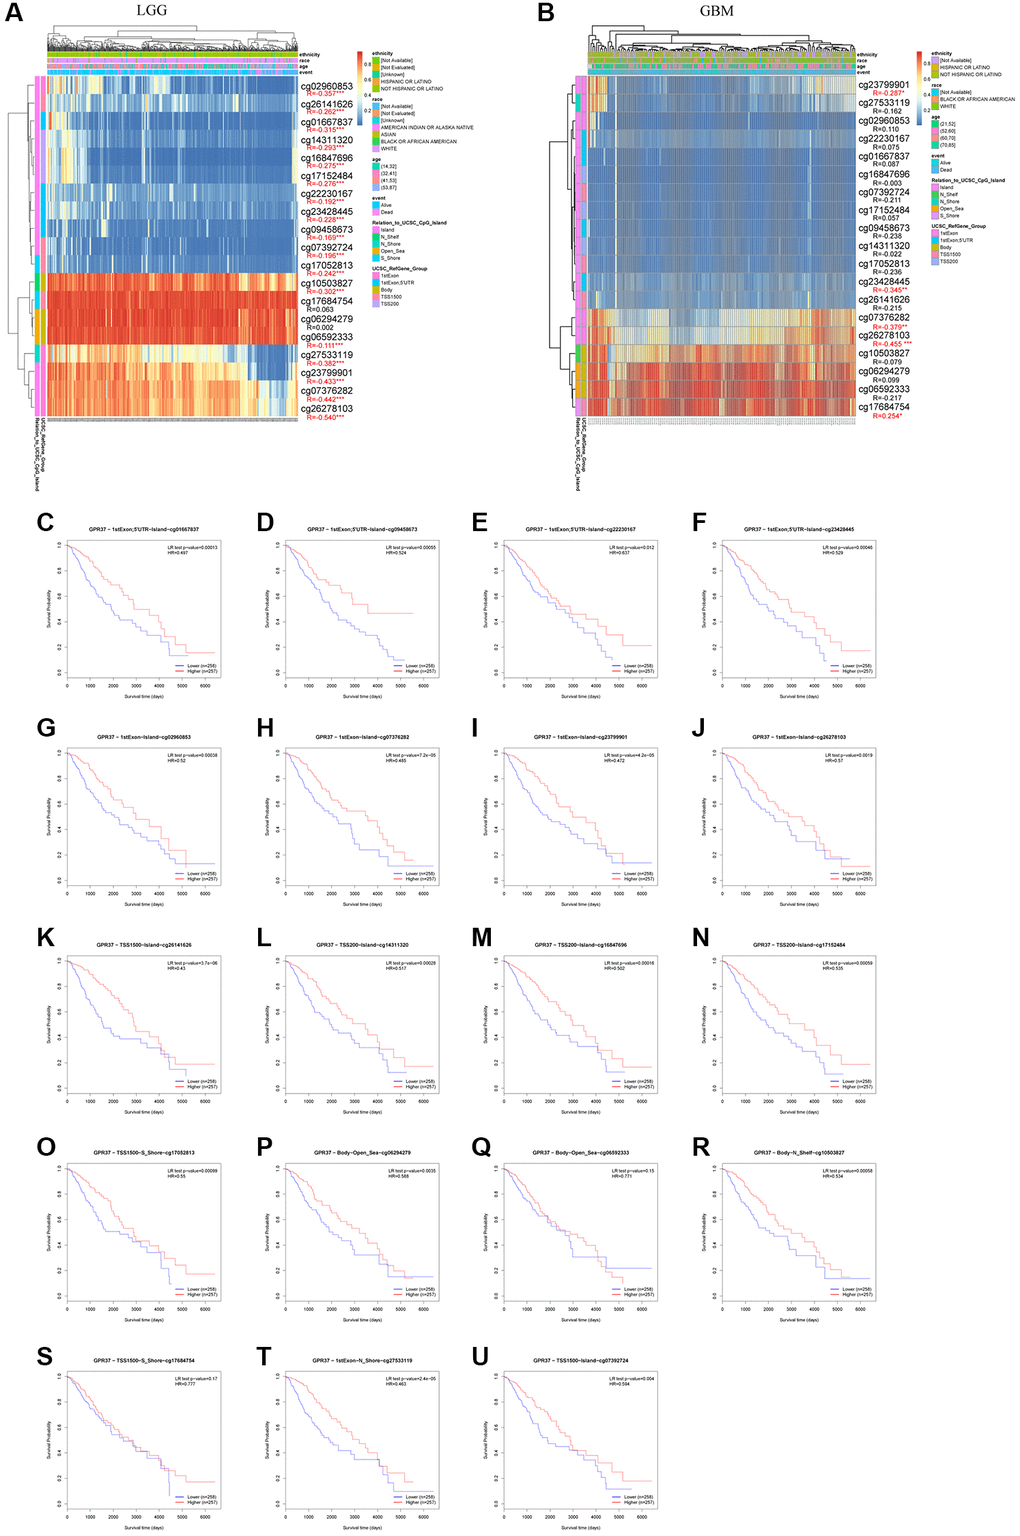 GPR37 promoter methylation in glioma. (A, B) Waterfall plots showing the correlation methylation level of GPR37 promoter and gene expression. (C–U) Survival curves as a function of methylation sites. *P **P ***P 